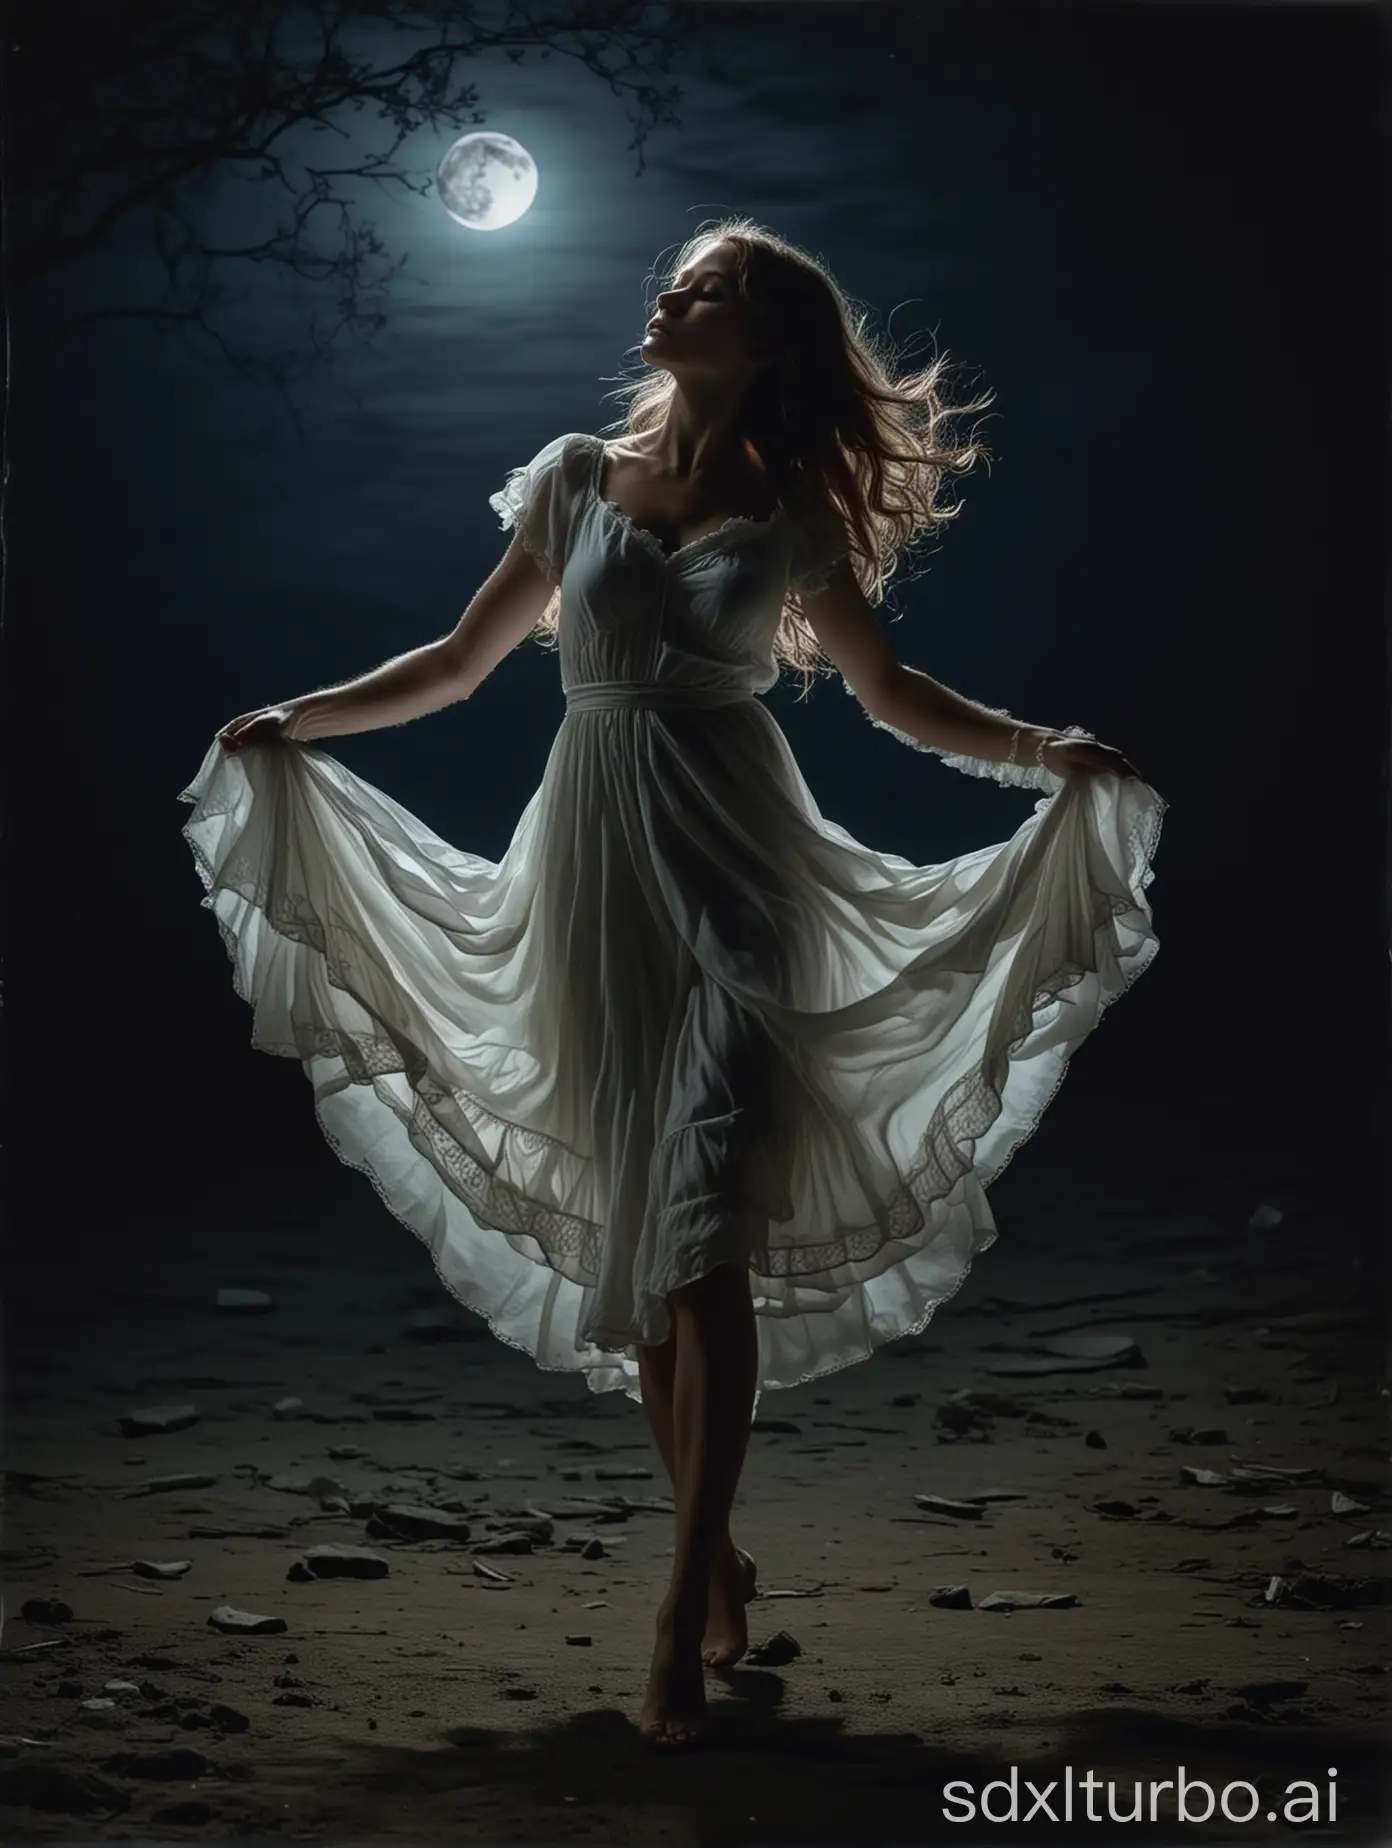 night darkness in the moonlight, dancing girl, from the fragments of life the hem is gathered, the semblance of true madness